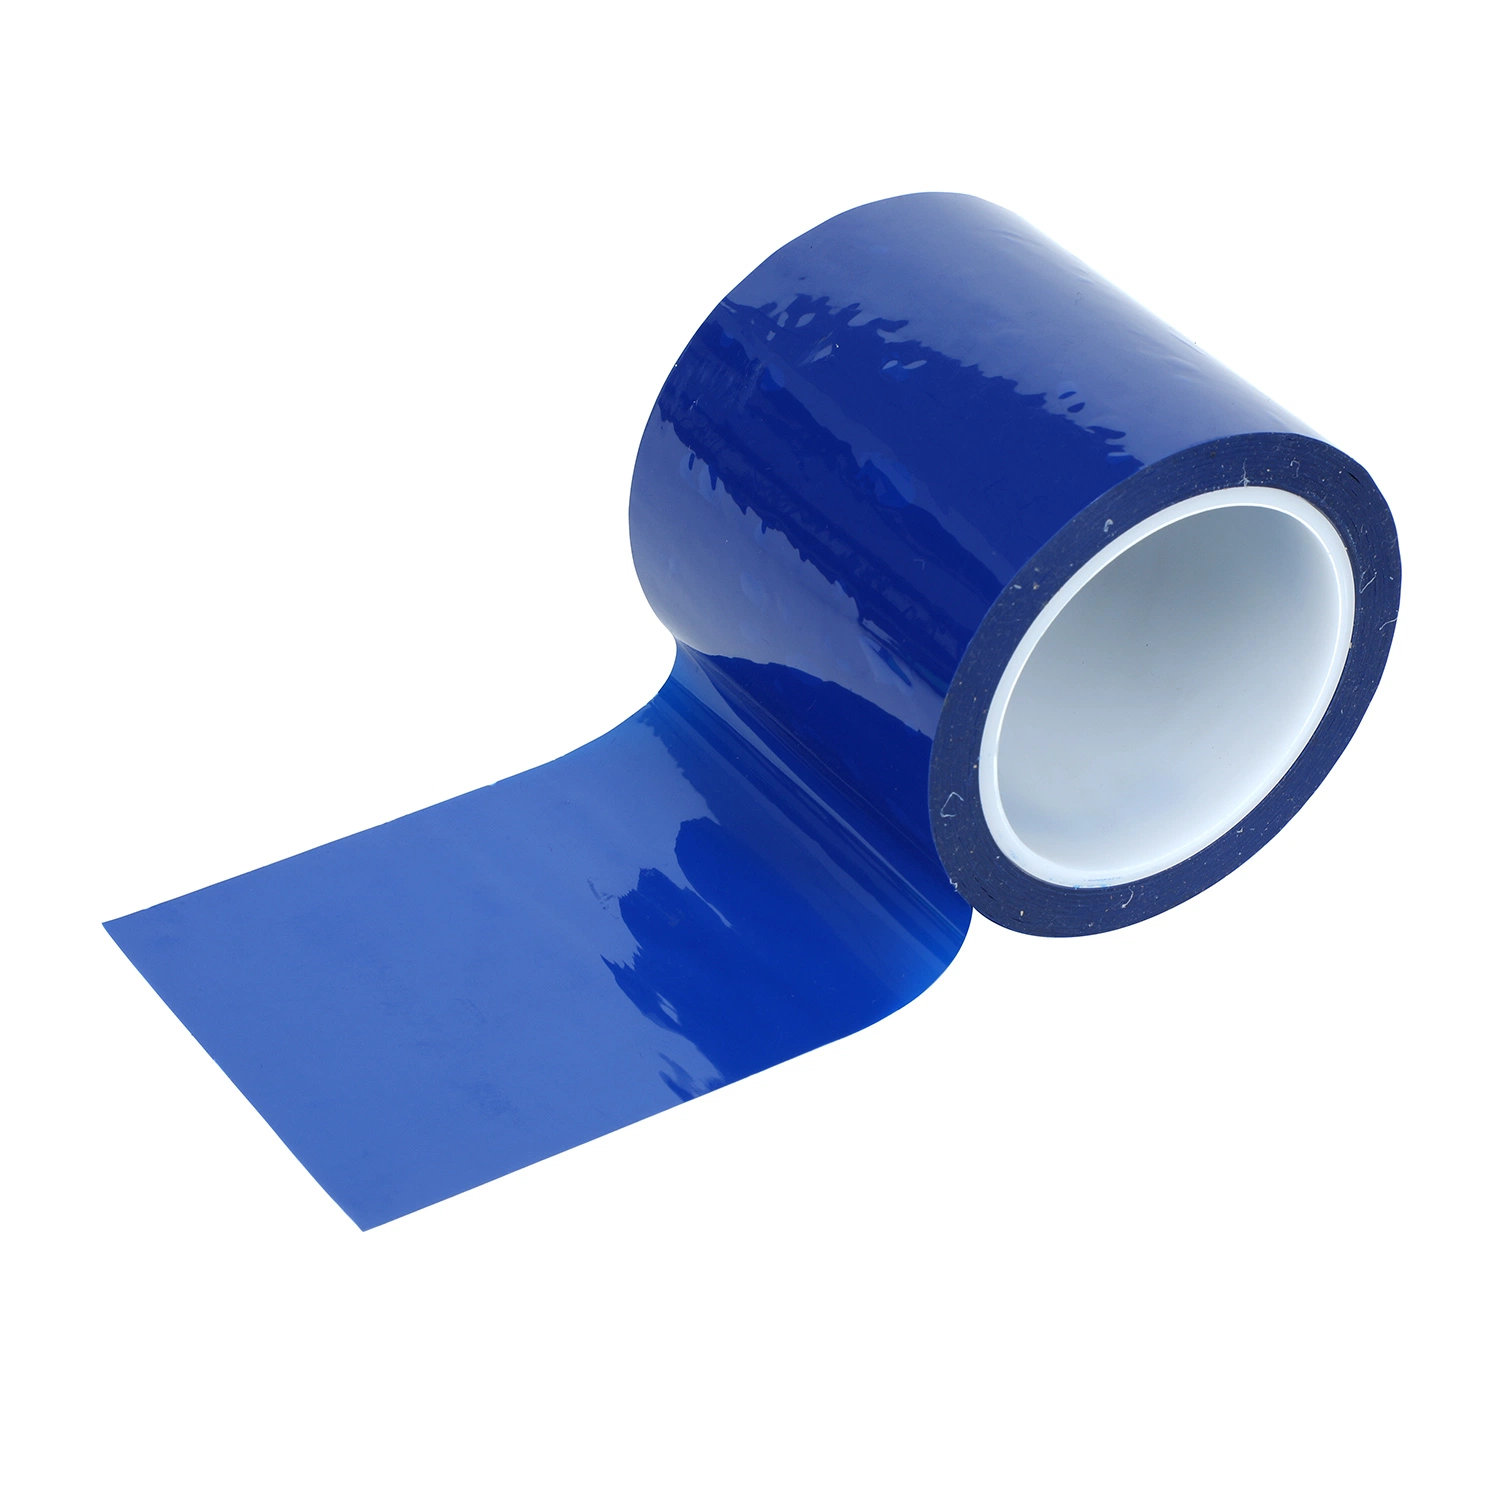 Blue/Transparent Glassinew Silicone Coating Release Liner Pet Film for Self-Adhesive Sticker Release Paper